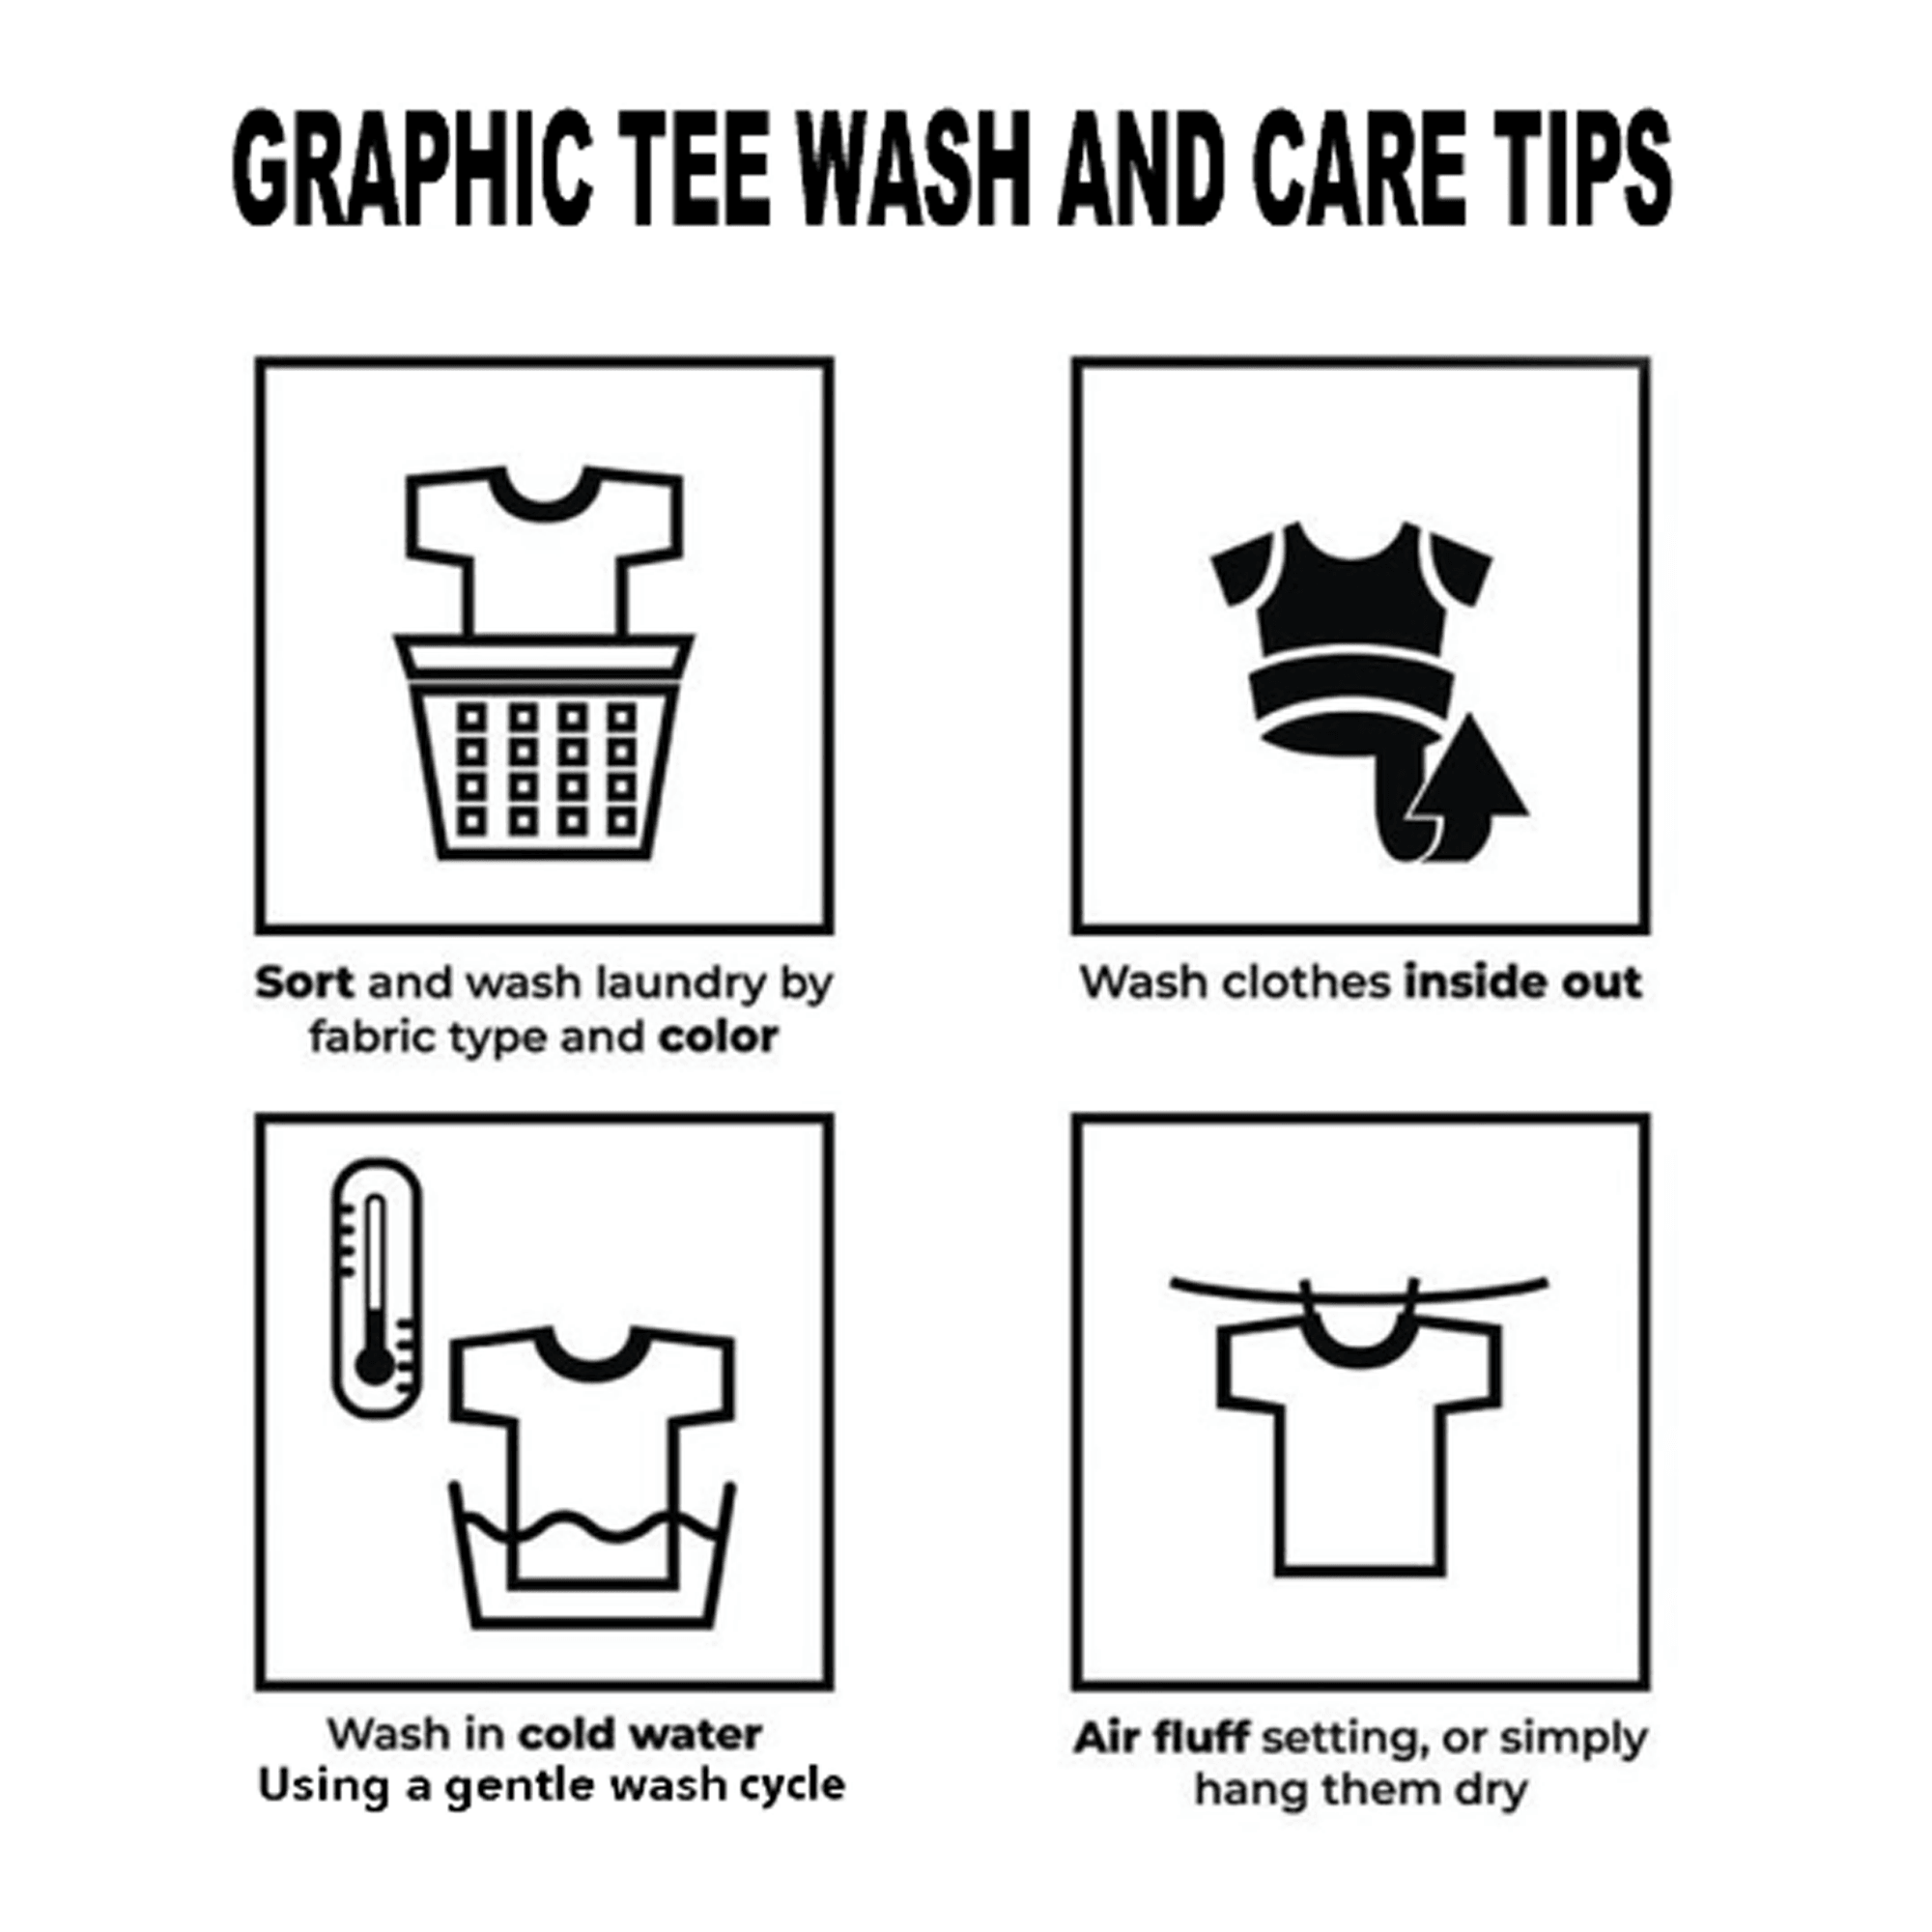 Philly Sneaker Tee care tips photo